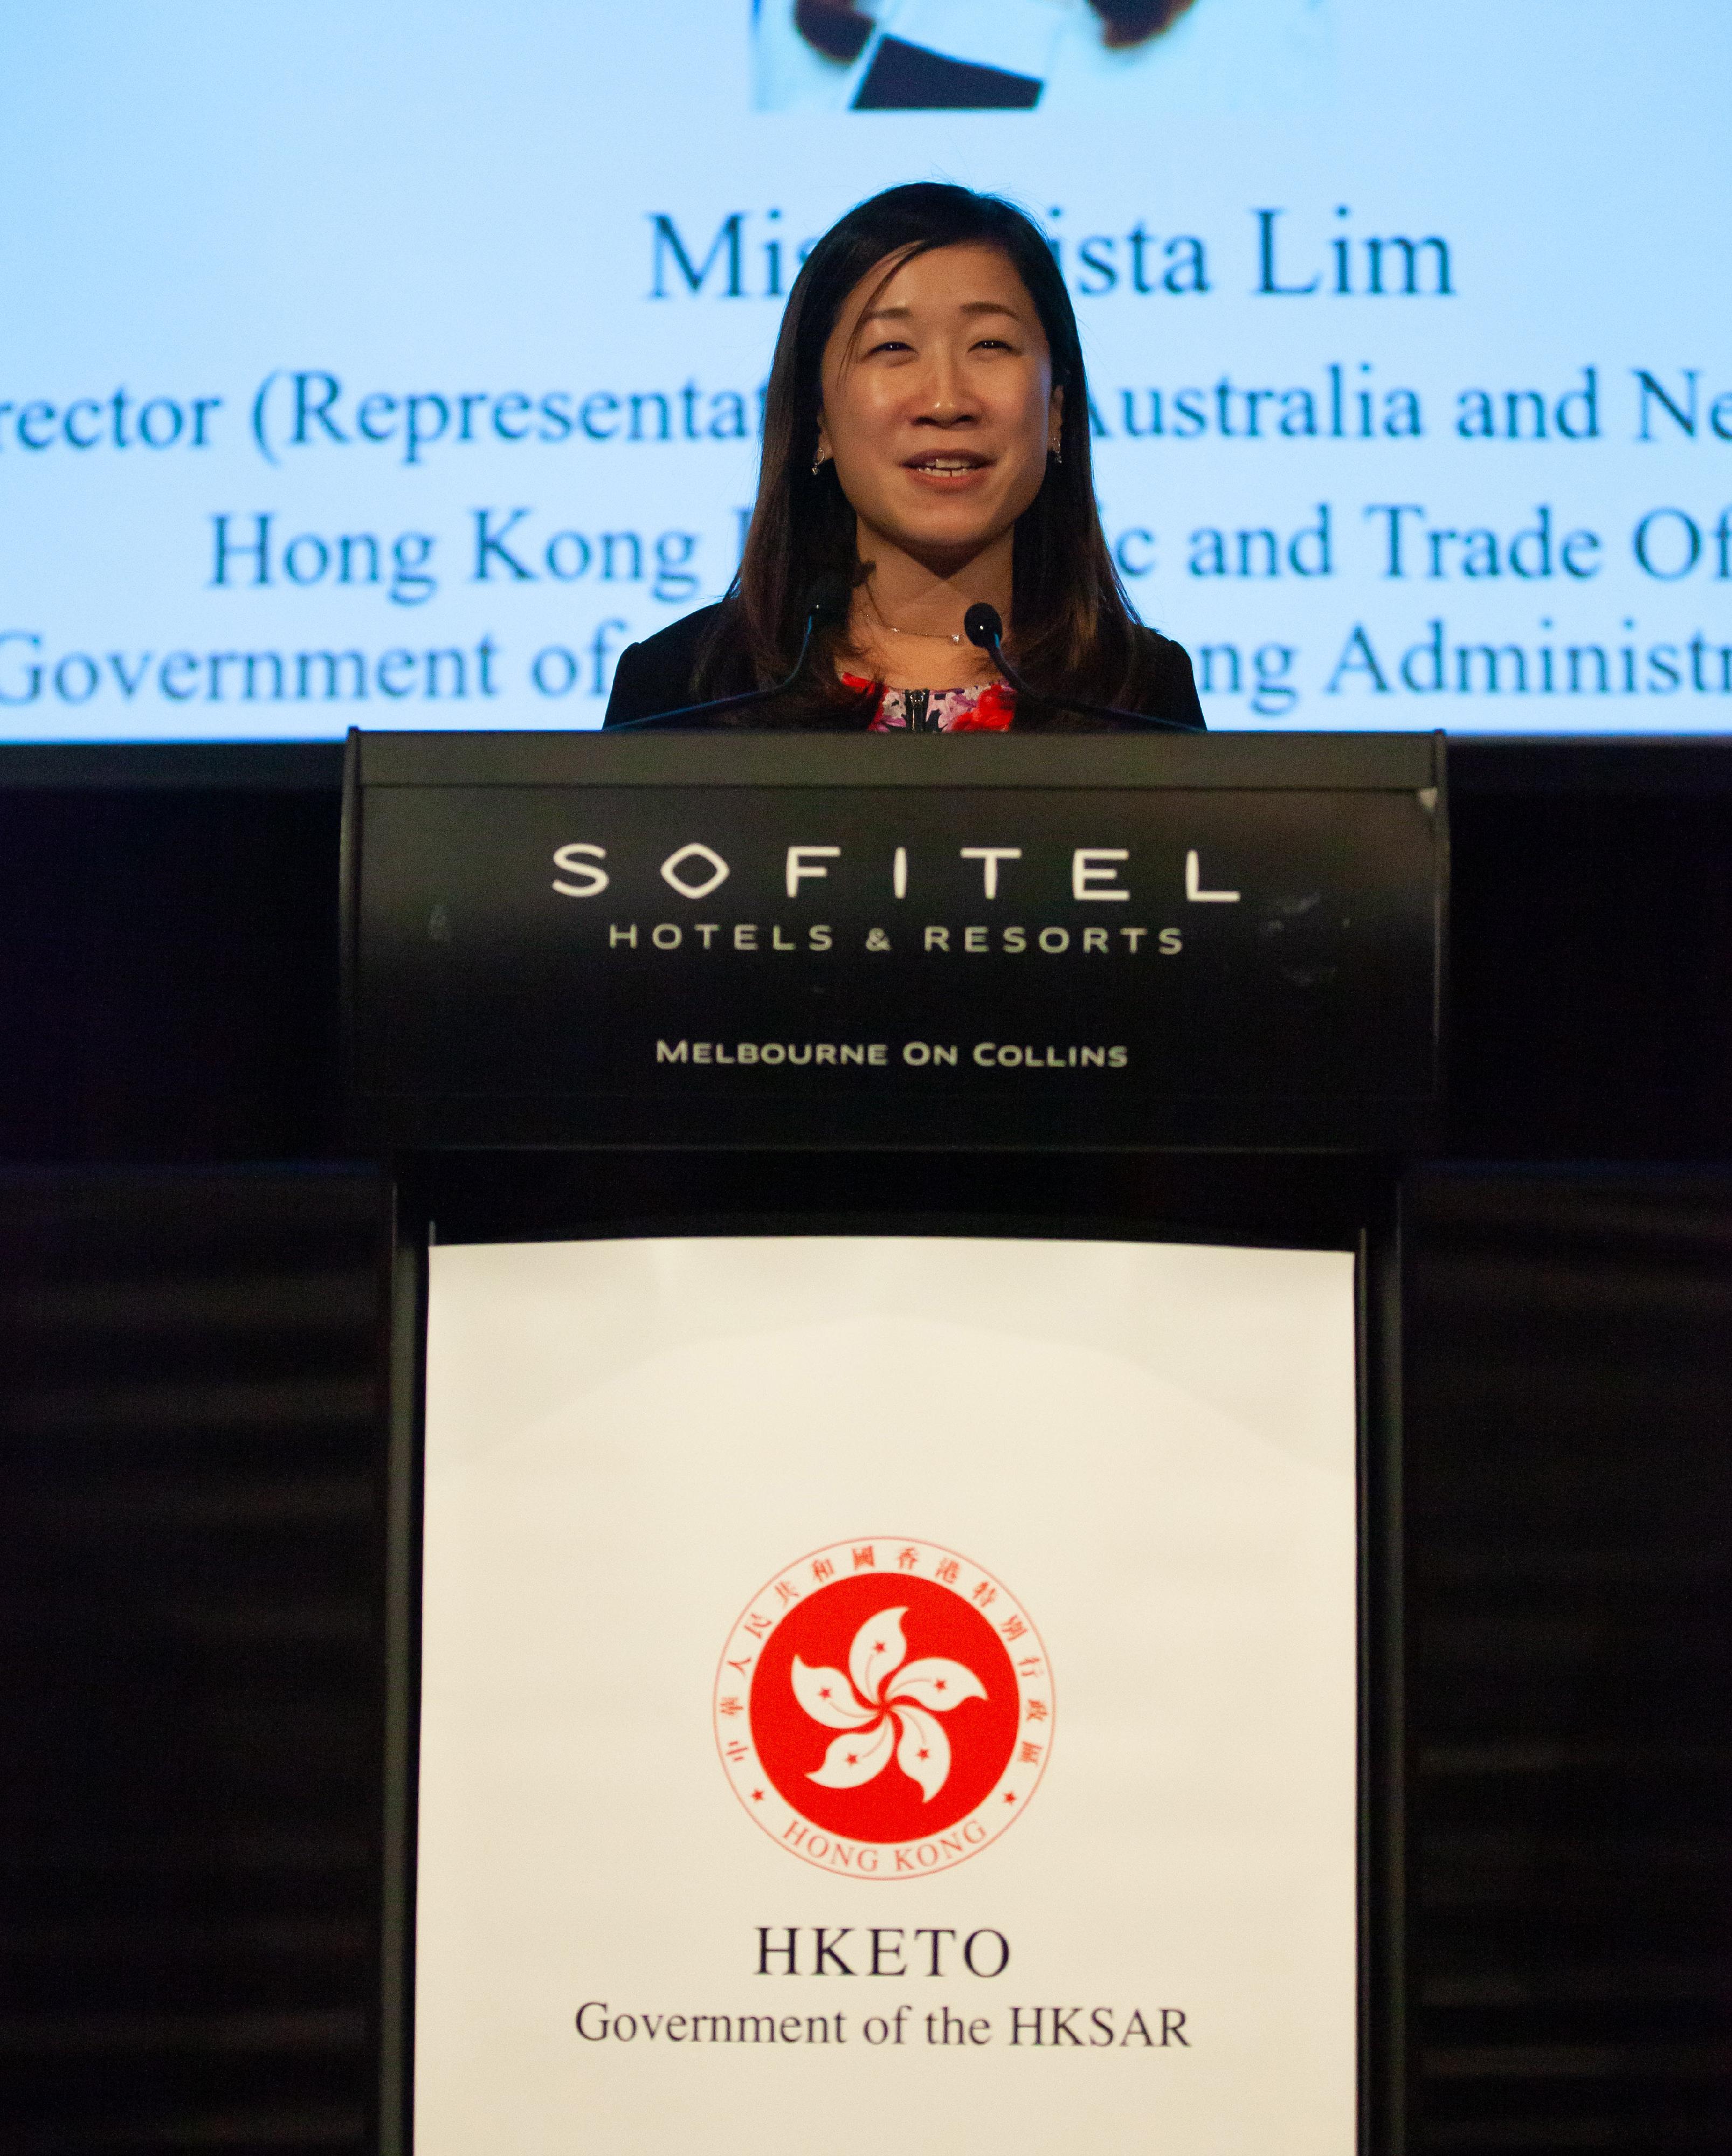 The Director of the Hong Kong Economic and Trade Office, Sydney (Sydney ETO), Miss Trista Lim, delivers a welcoming speech at a reception held by Sydney ETO in Melbourne, Australia, yesterday (July 12) to celebrate the 25th anniversary of the establishment of the Hong Kong Special Administrative Region.